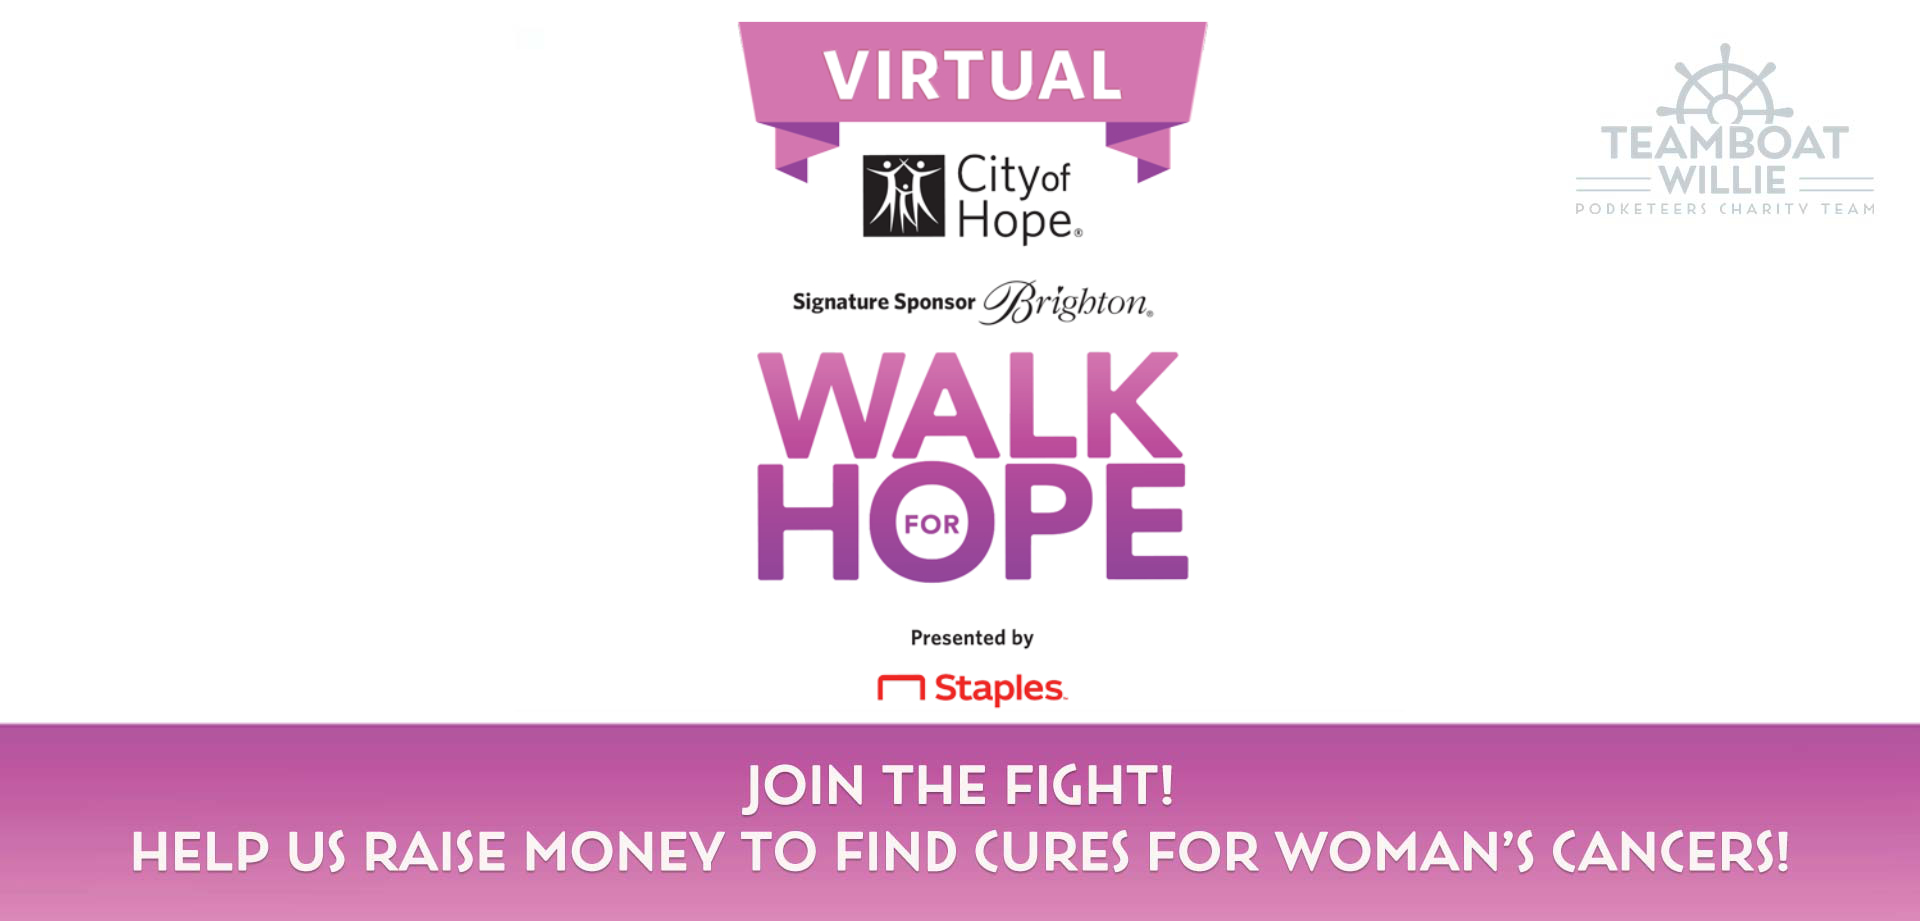 Announcement for Teamboat Willie's participation in City of Hope's Walk For Hope charity virtual walk